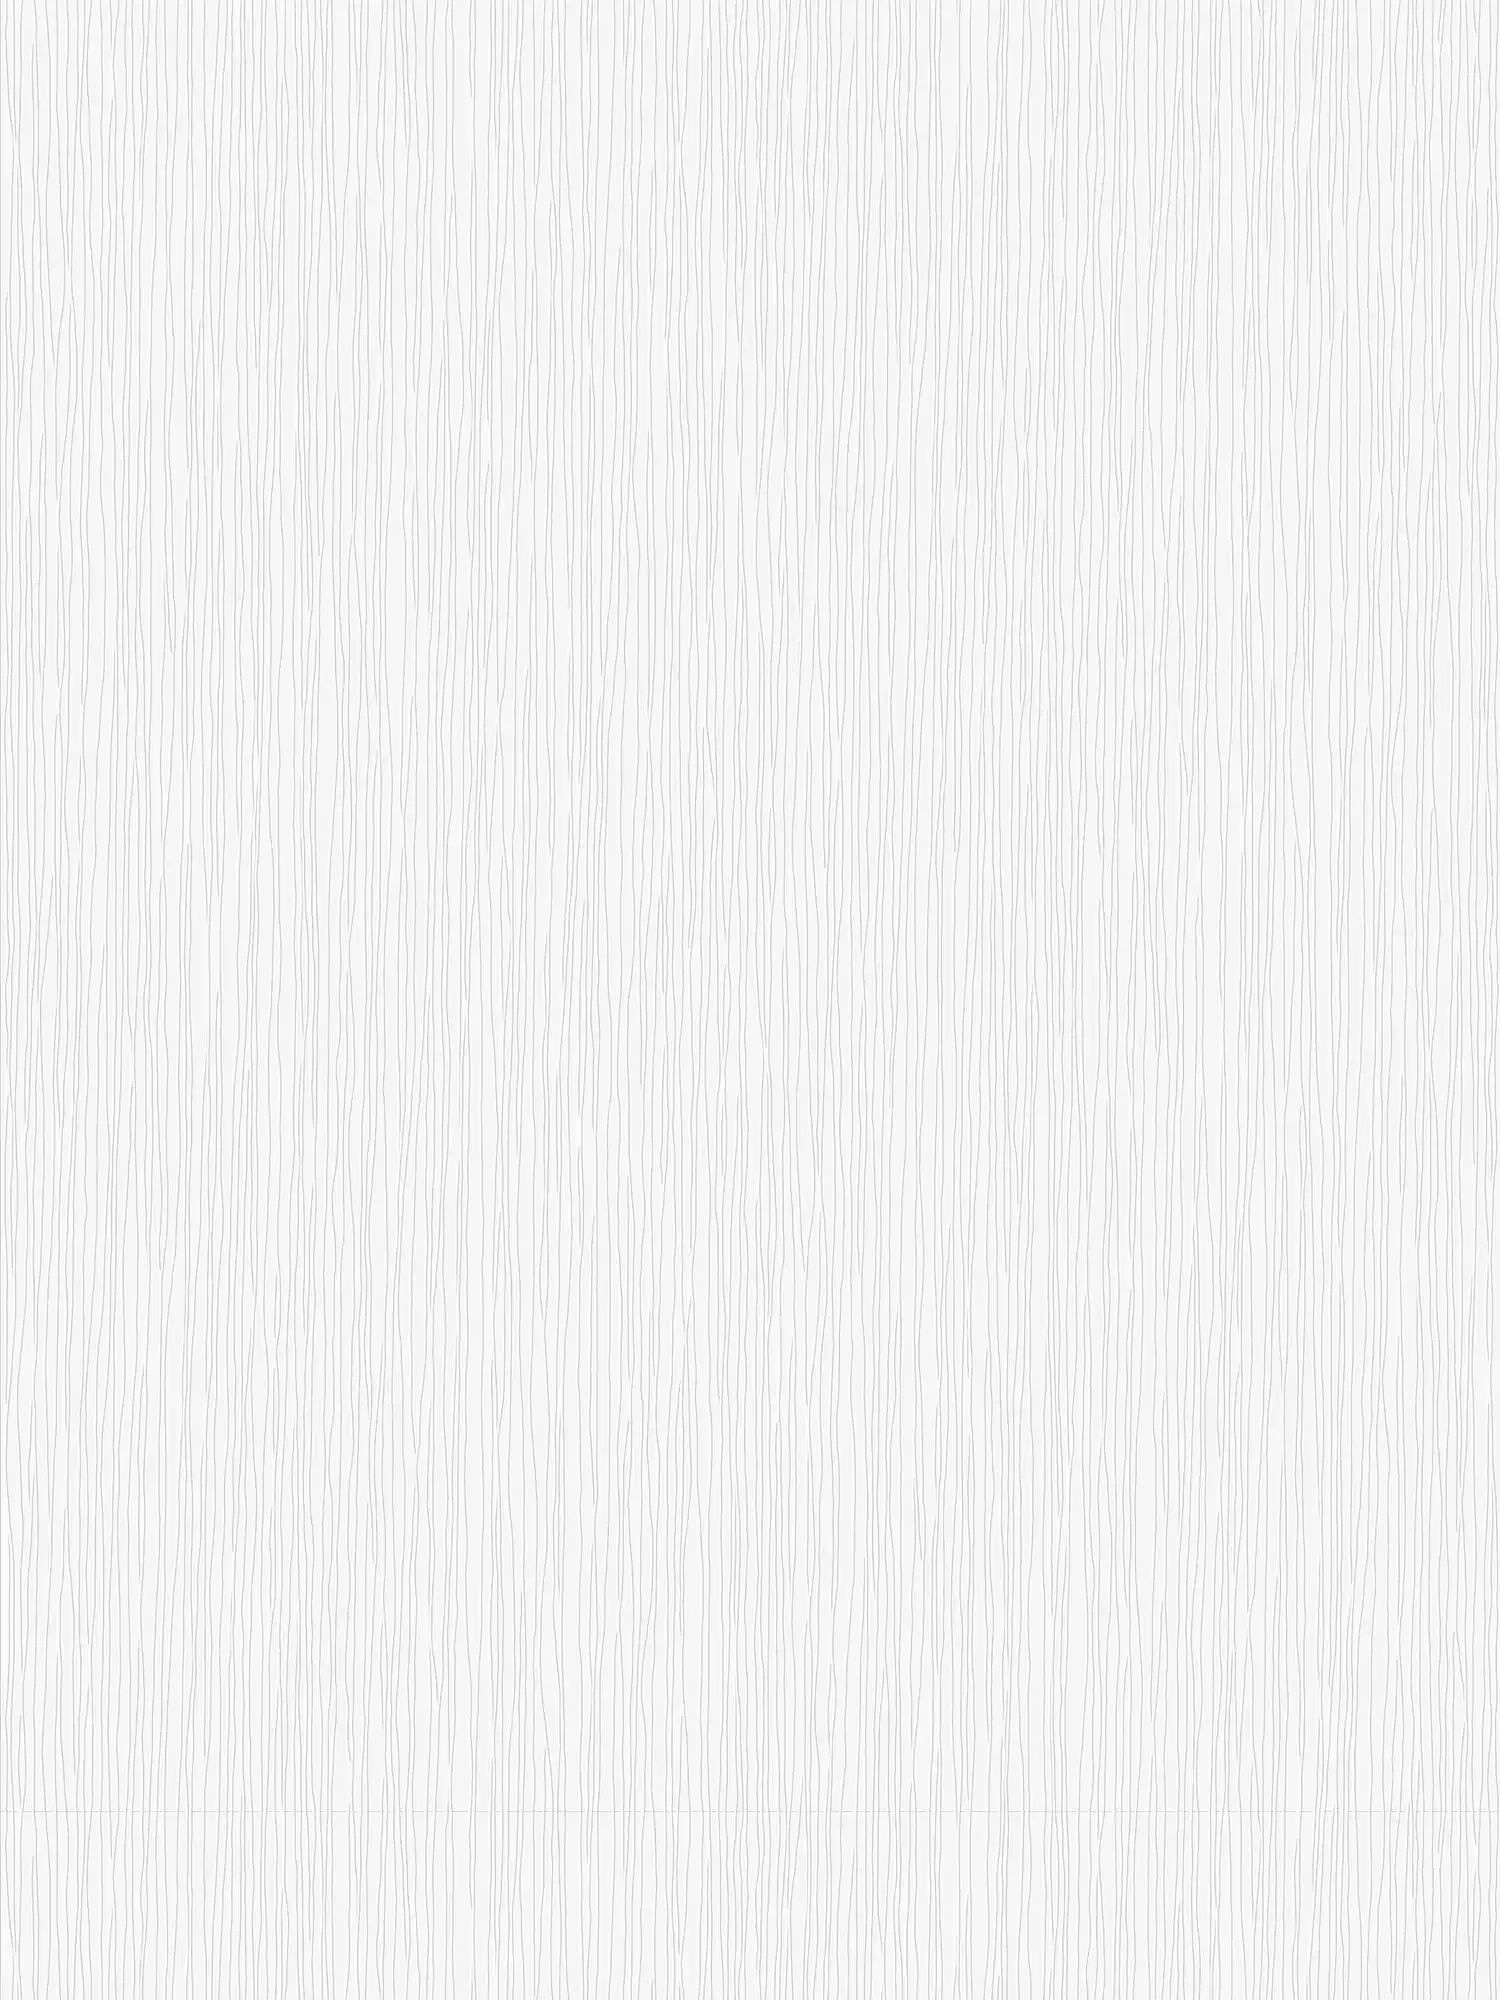 Wallpaper lined with pale blue lines - white
